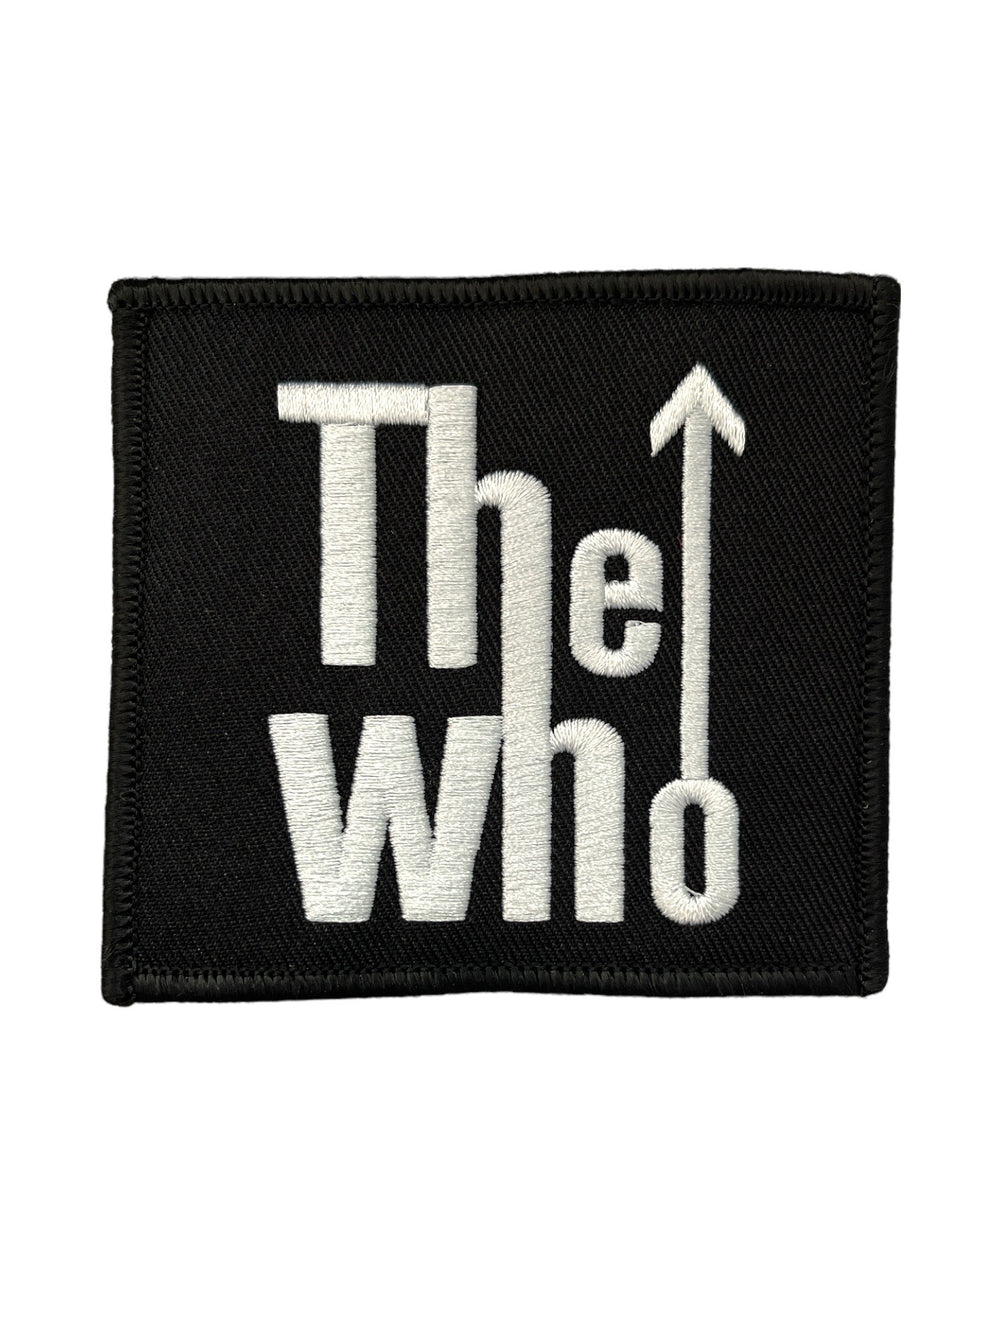 Who The - The Arrow Logo Official Woven Patch Brand New